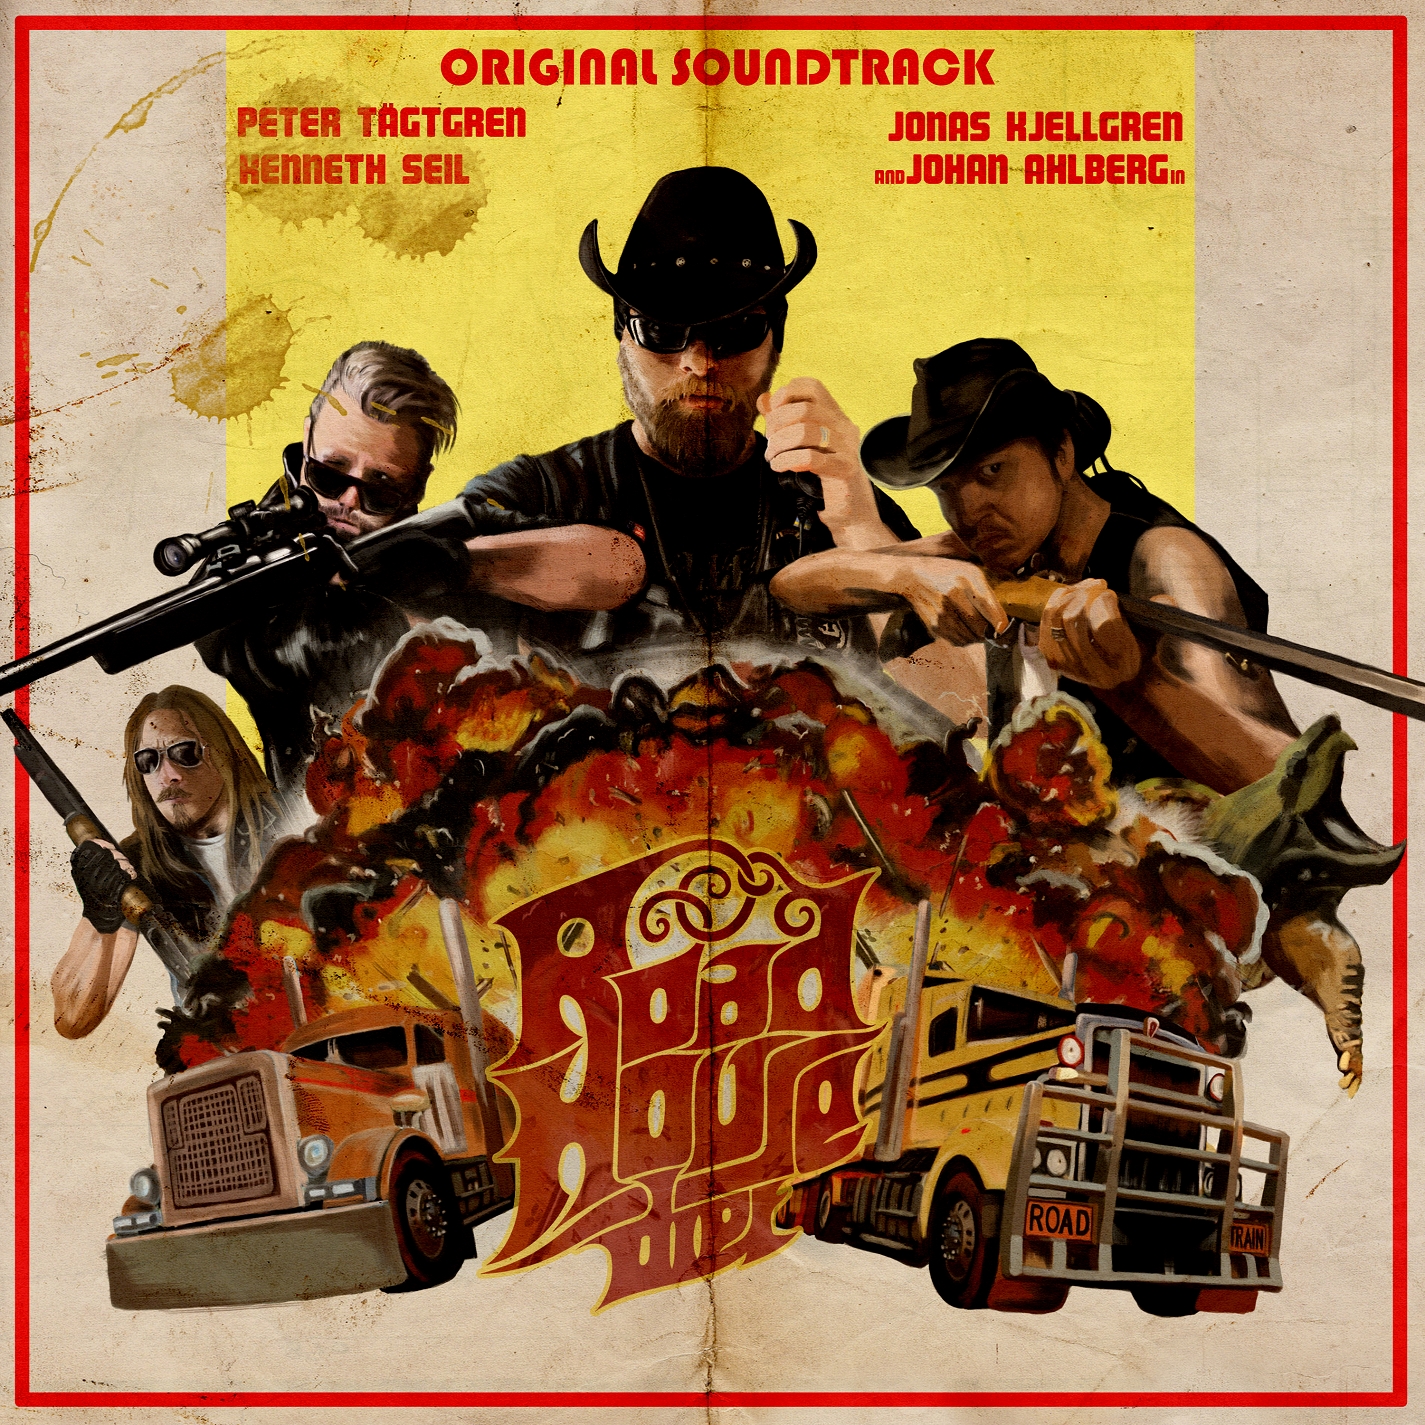 Errny Blues&Otherstyles Roadhouse Diet Original Soundtrack